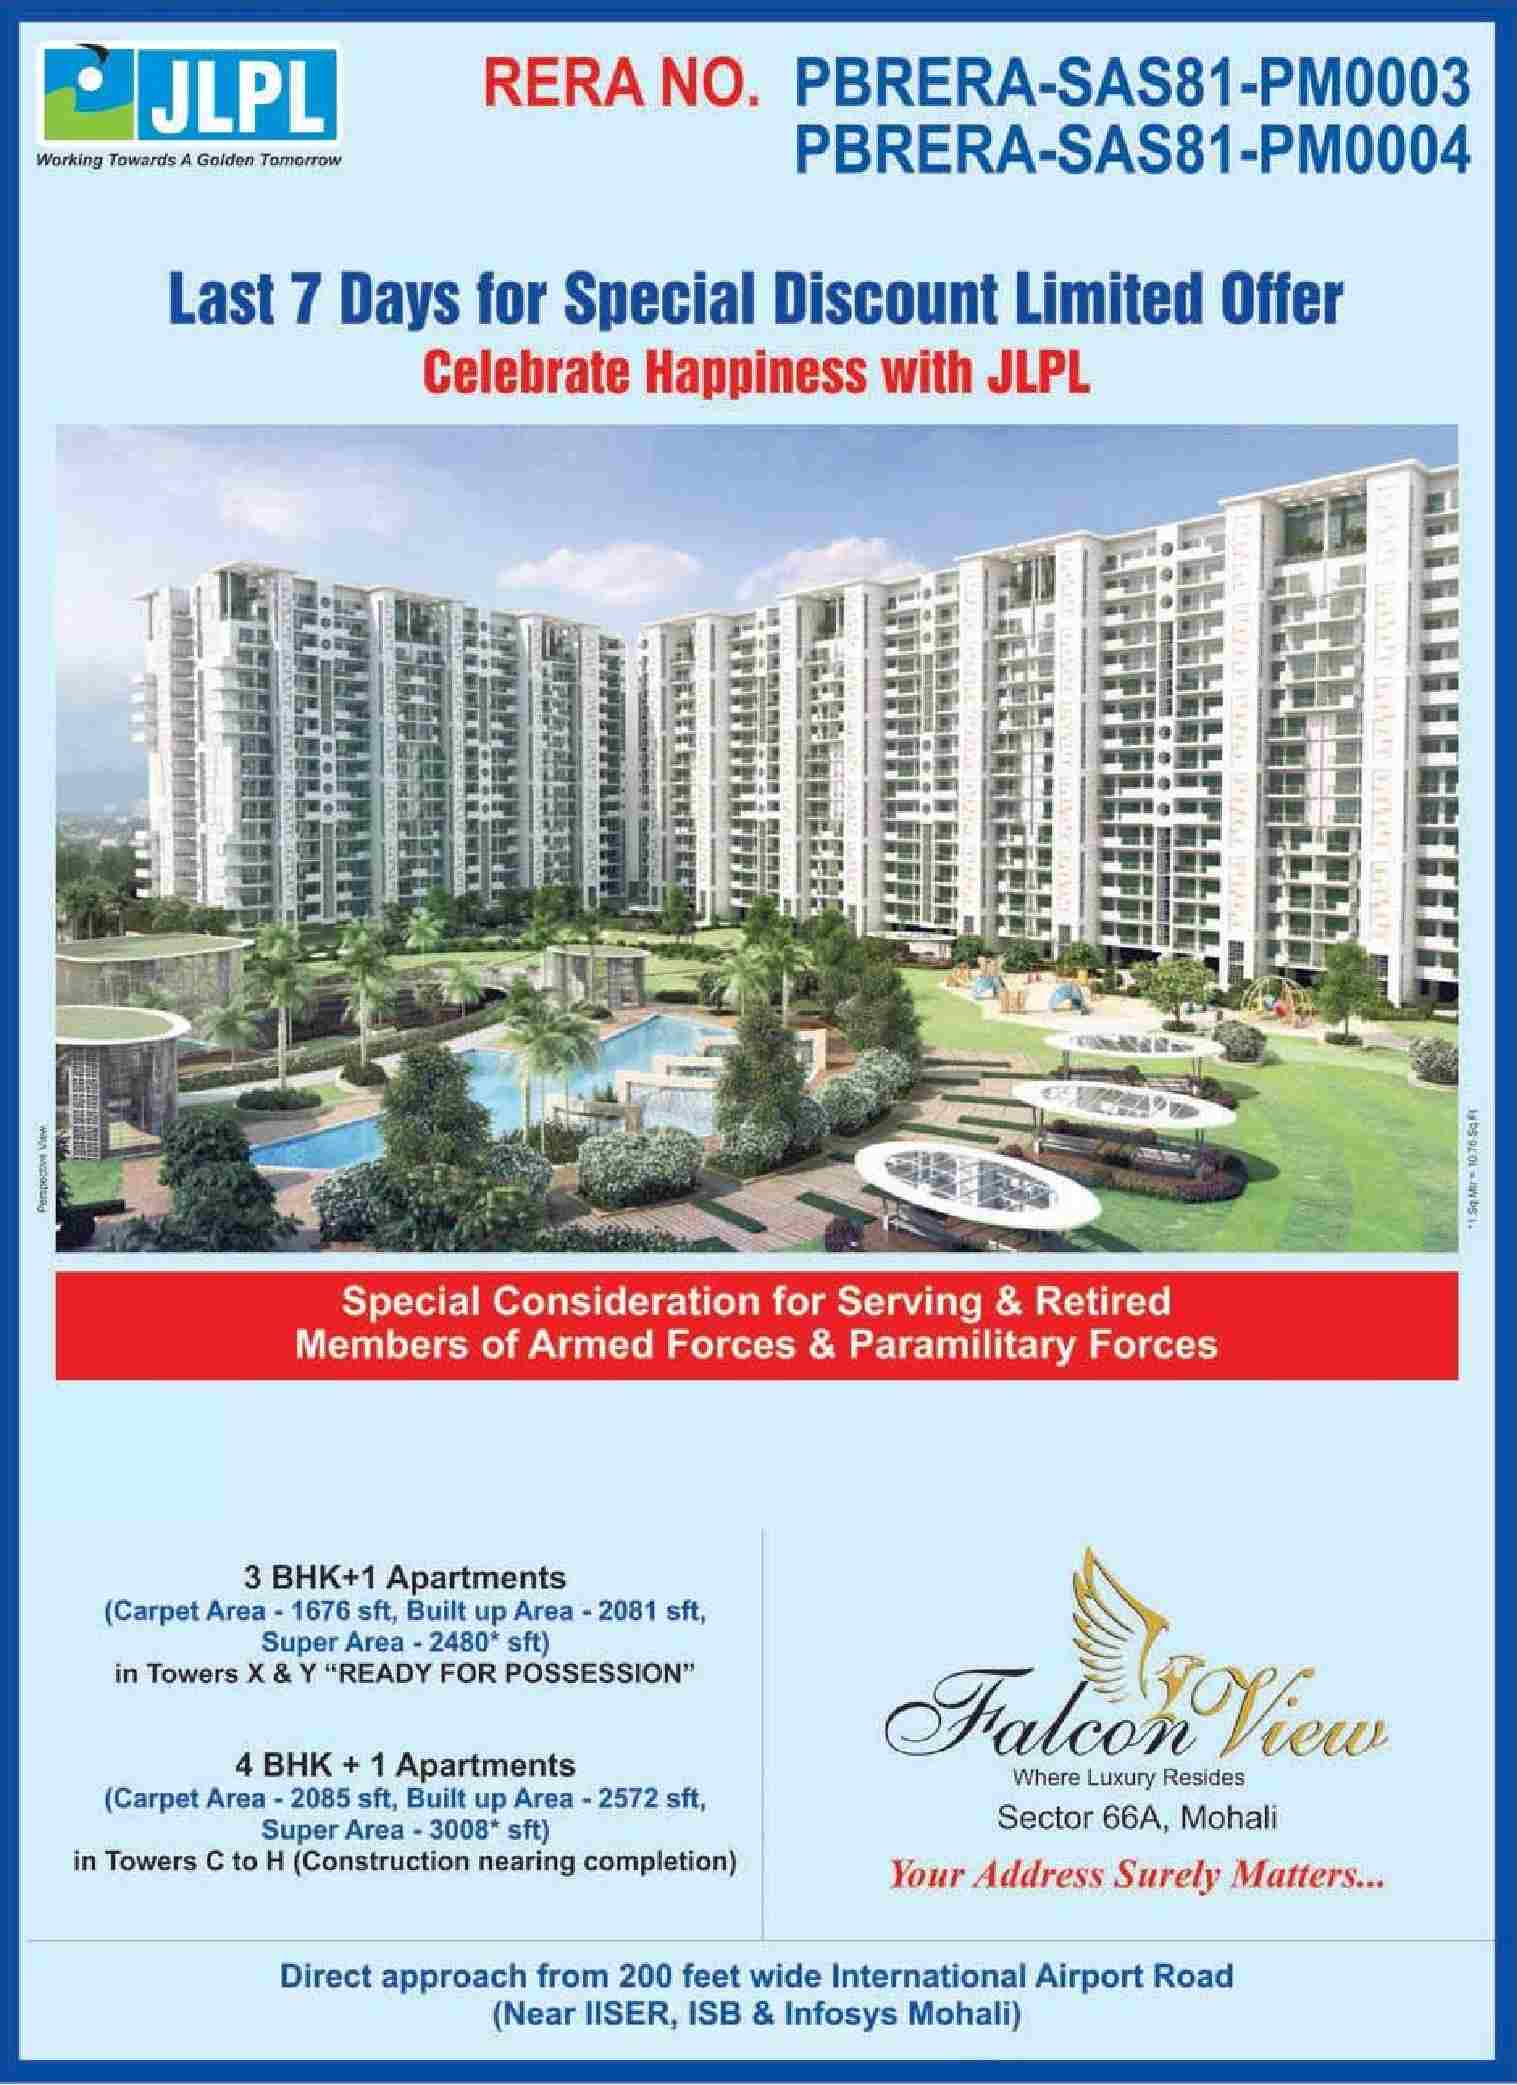 Celebrate happiness by residing at JLPL Falcon View in Mohali Update